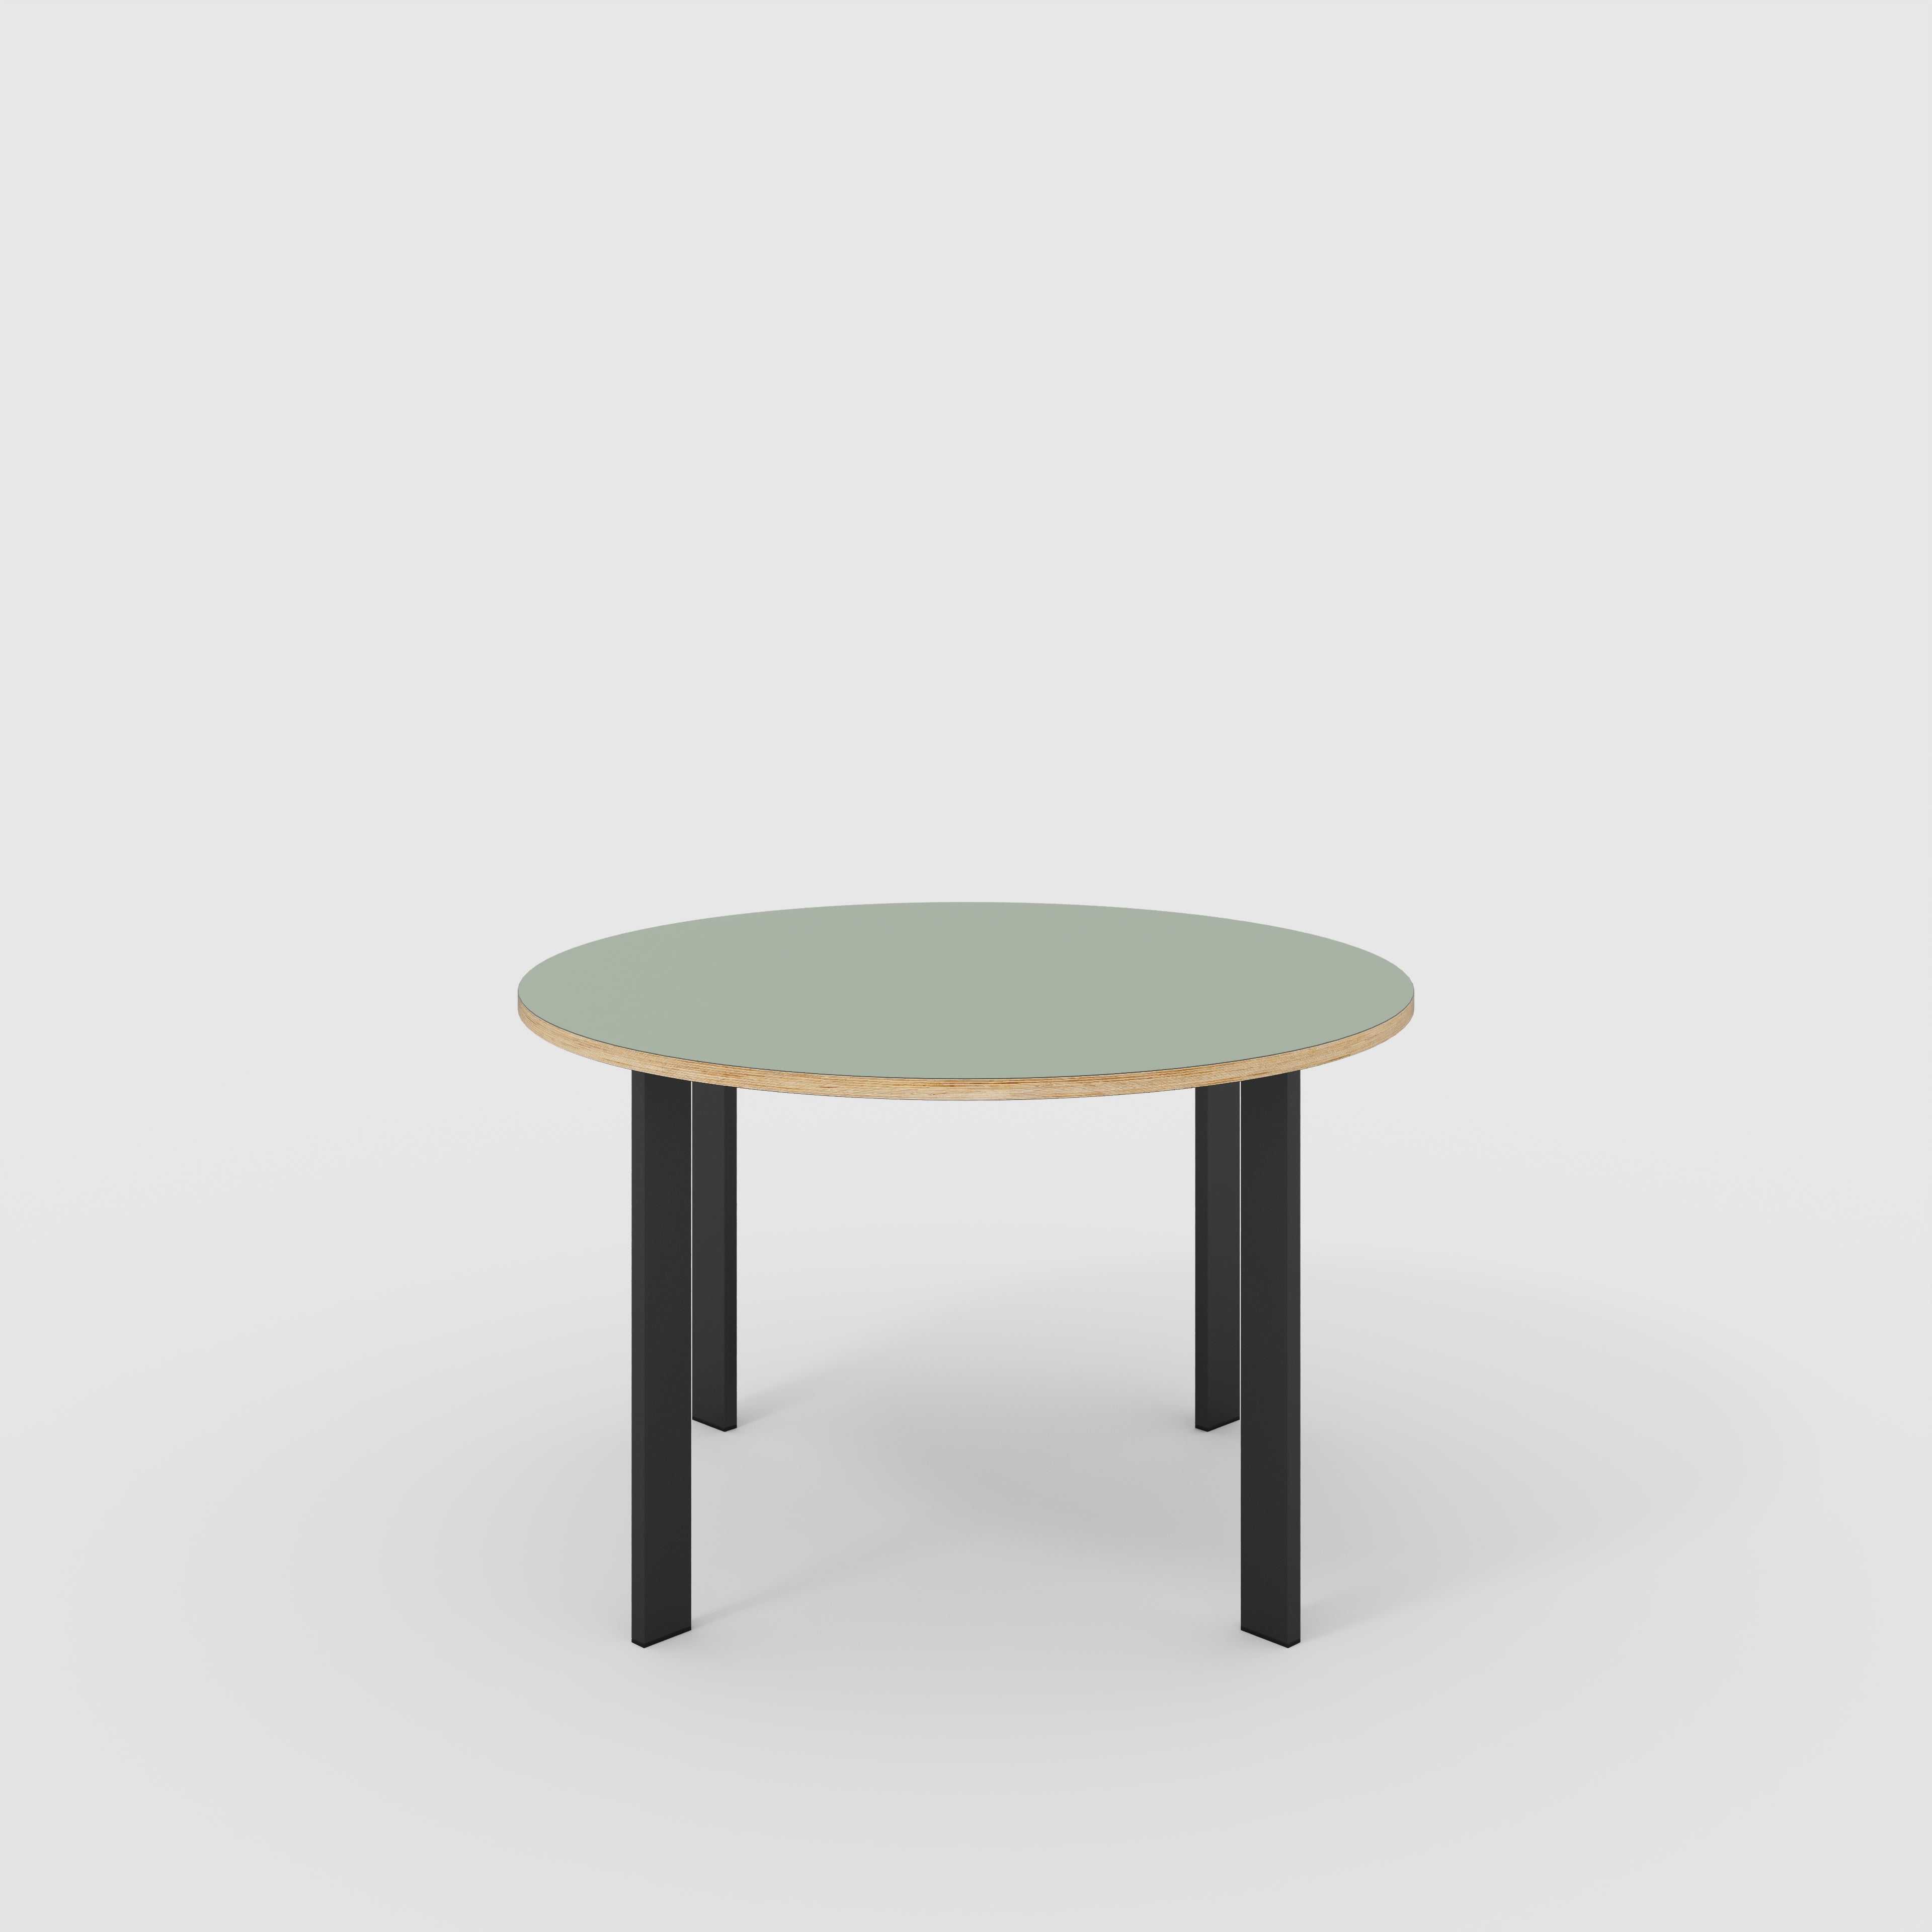 Round Table with Black Rectangular Single Pin Legs - Formica Green Slate - 1200(dia) x 750(h)